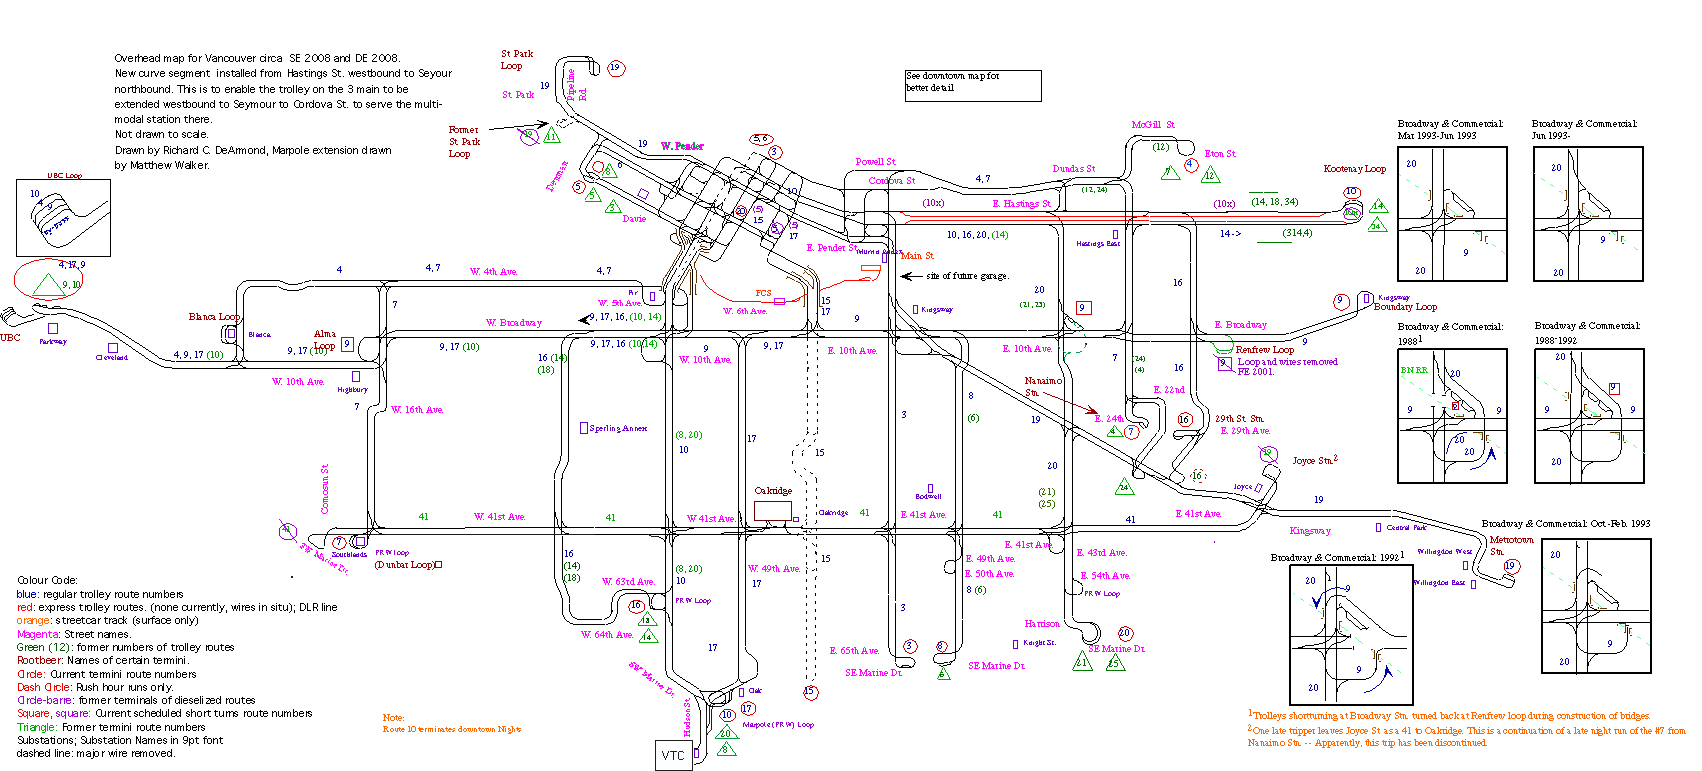 [Diagram of Vancouver trolleybus network, excluding downtown]